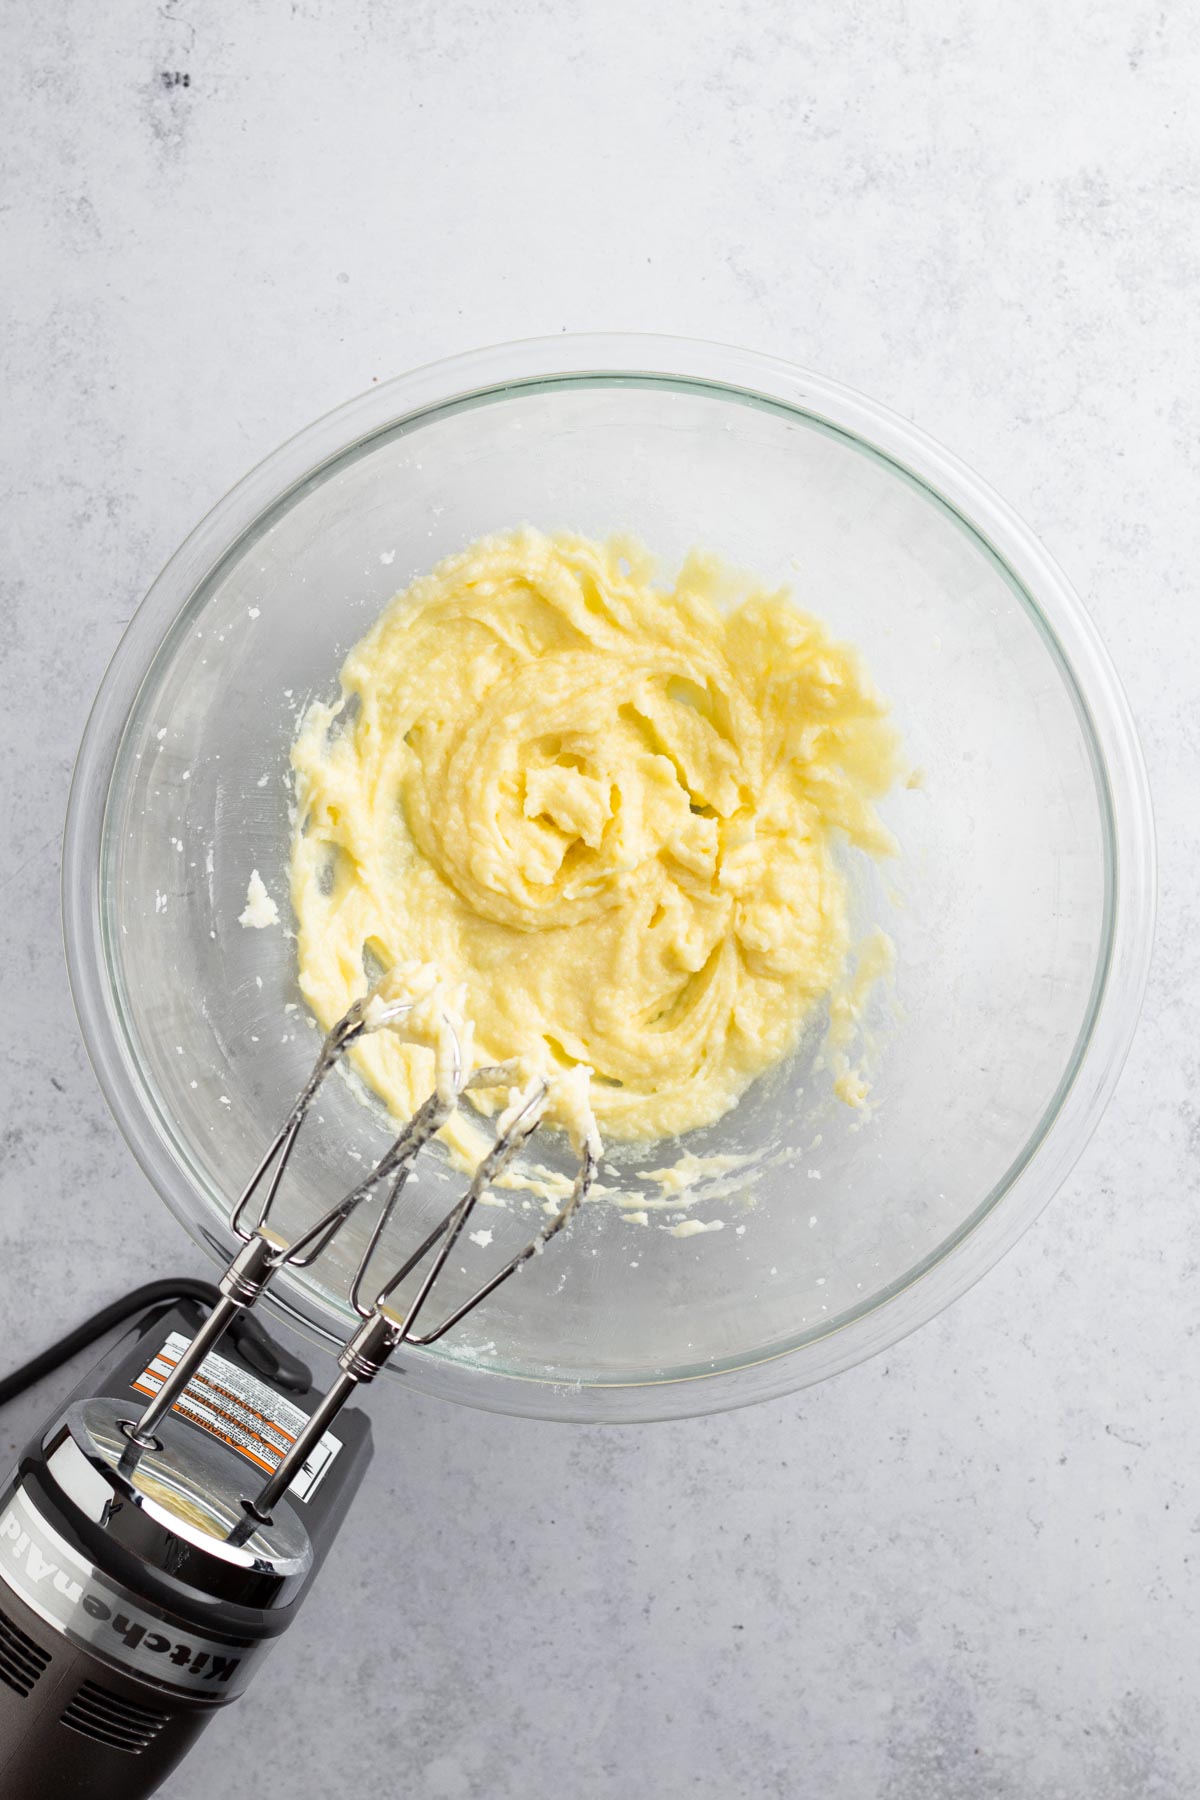 Butter, sugar, and eggs beaten together in a glass bowl.